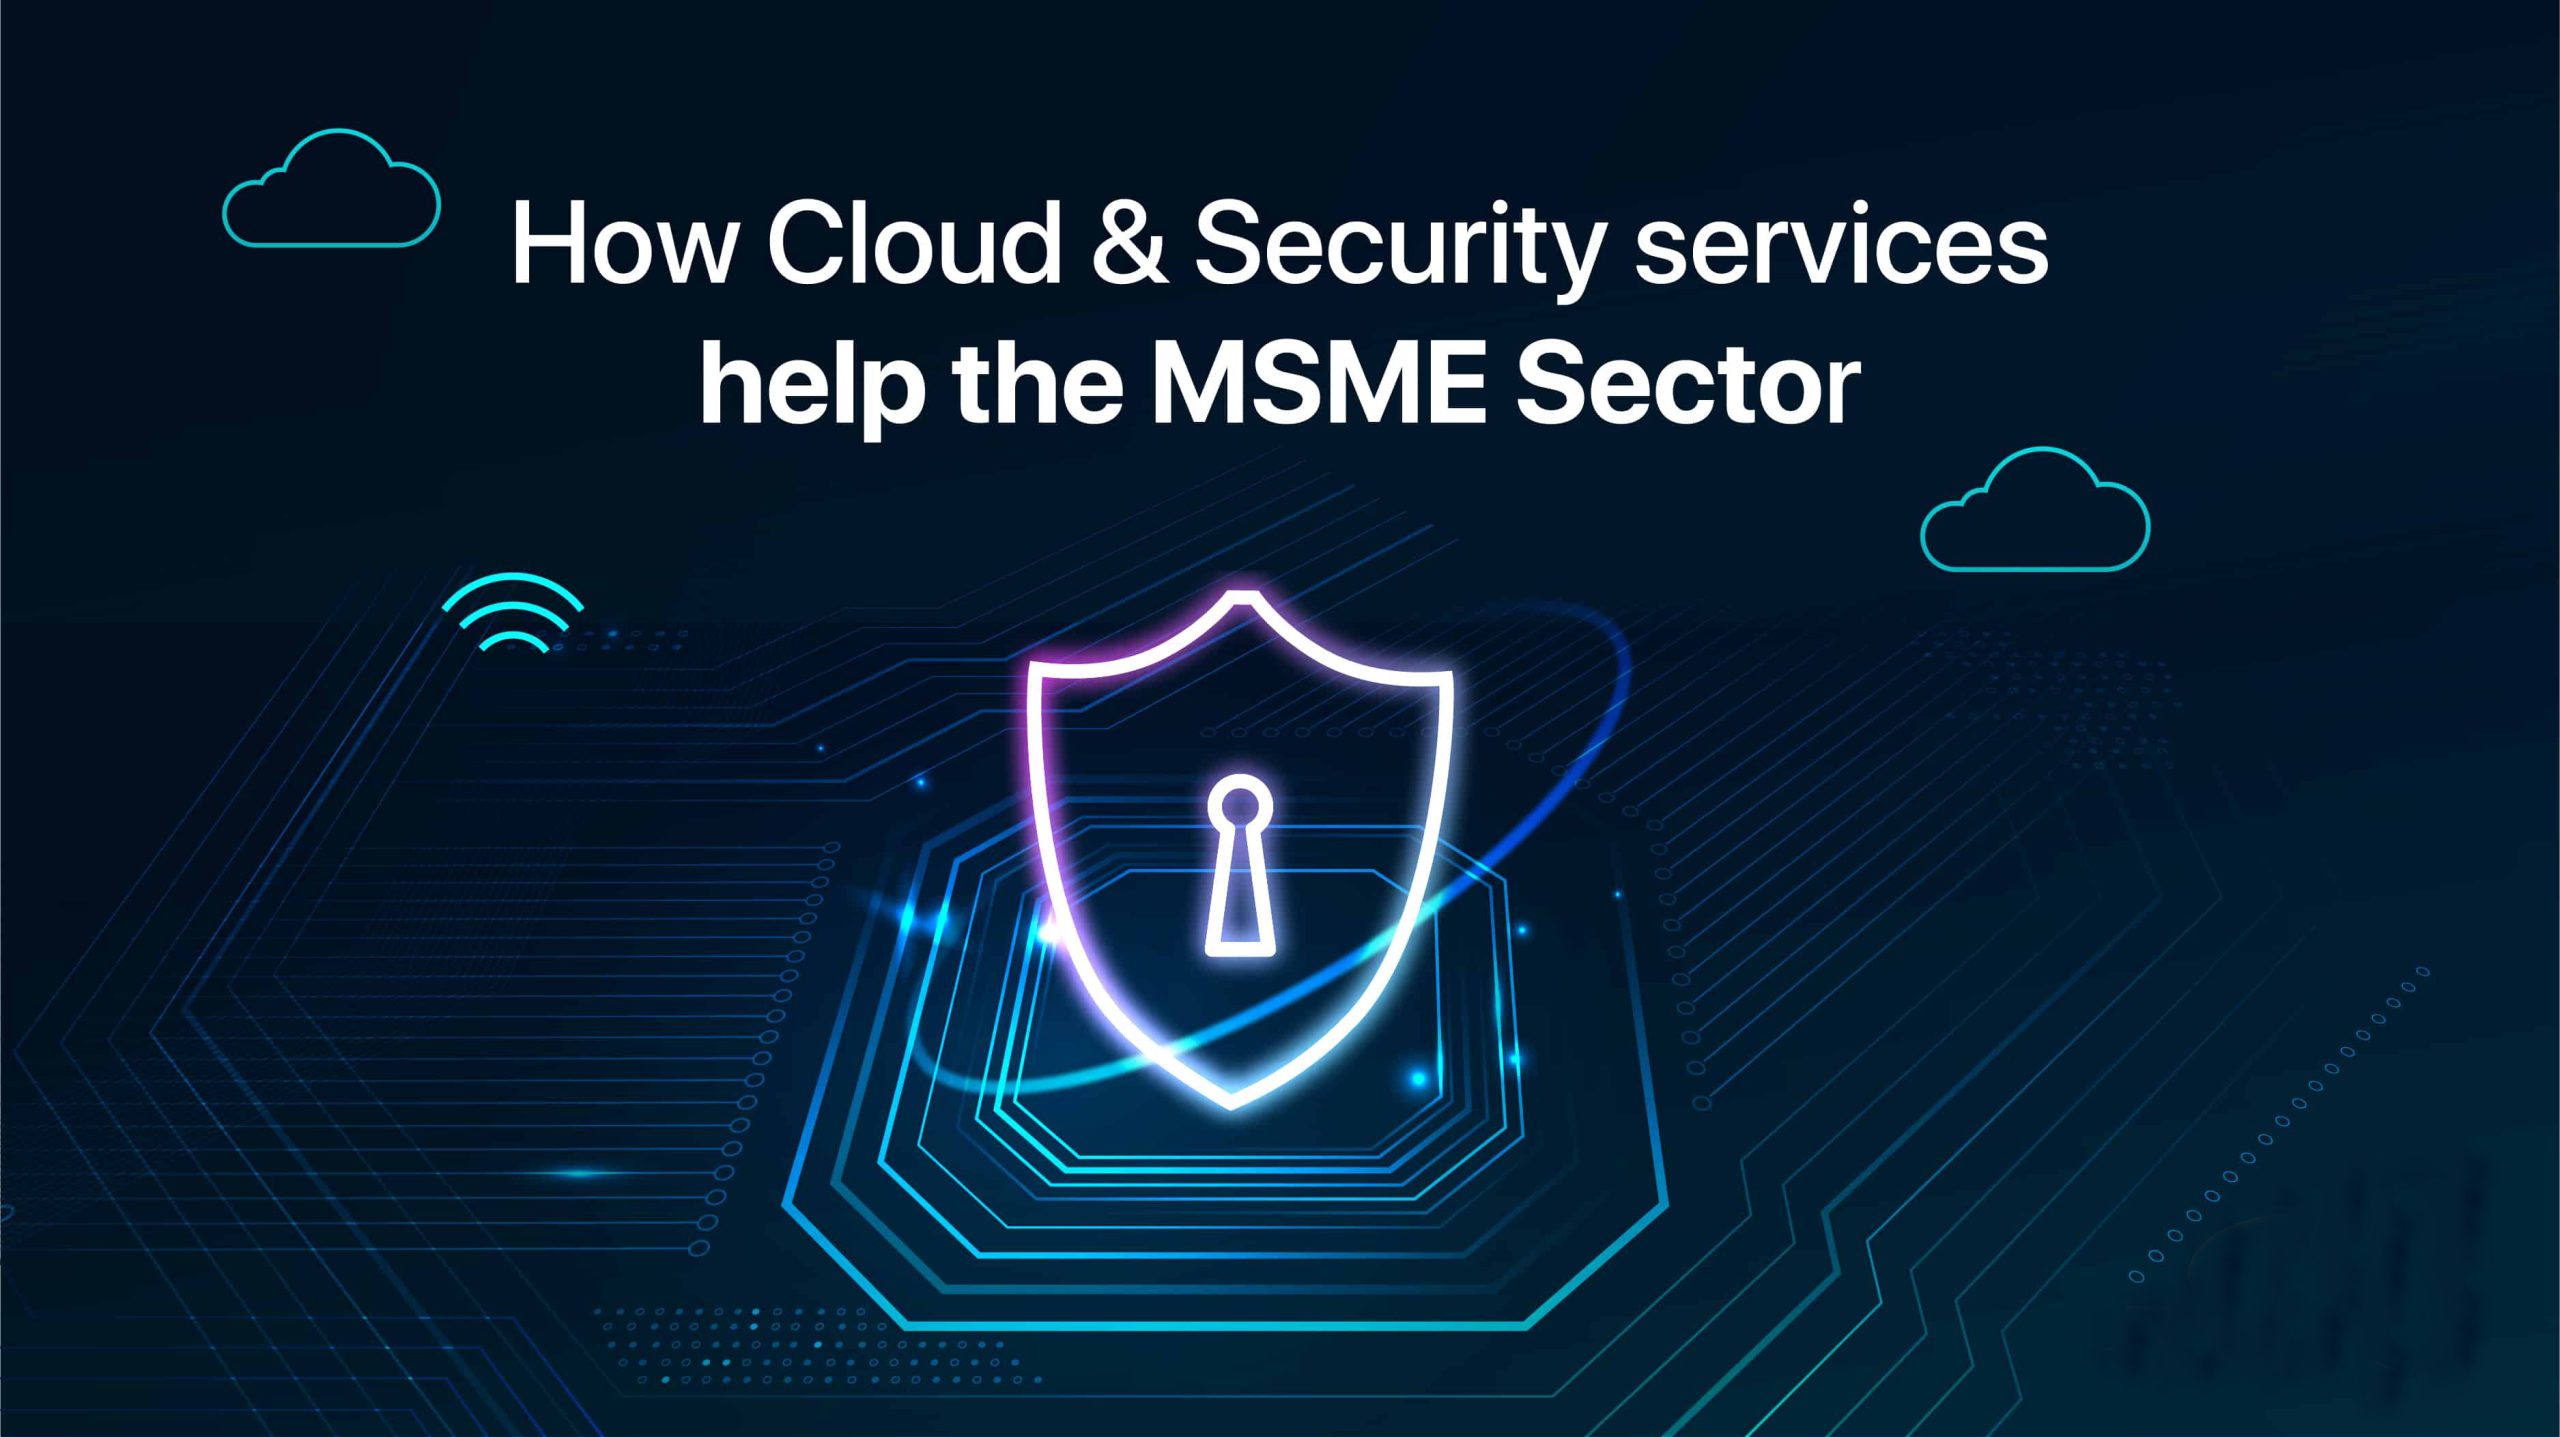 How Cloud & Security services help the MSME Sector.